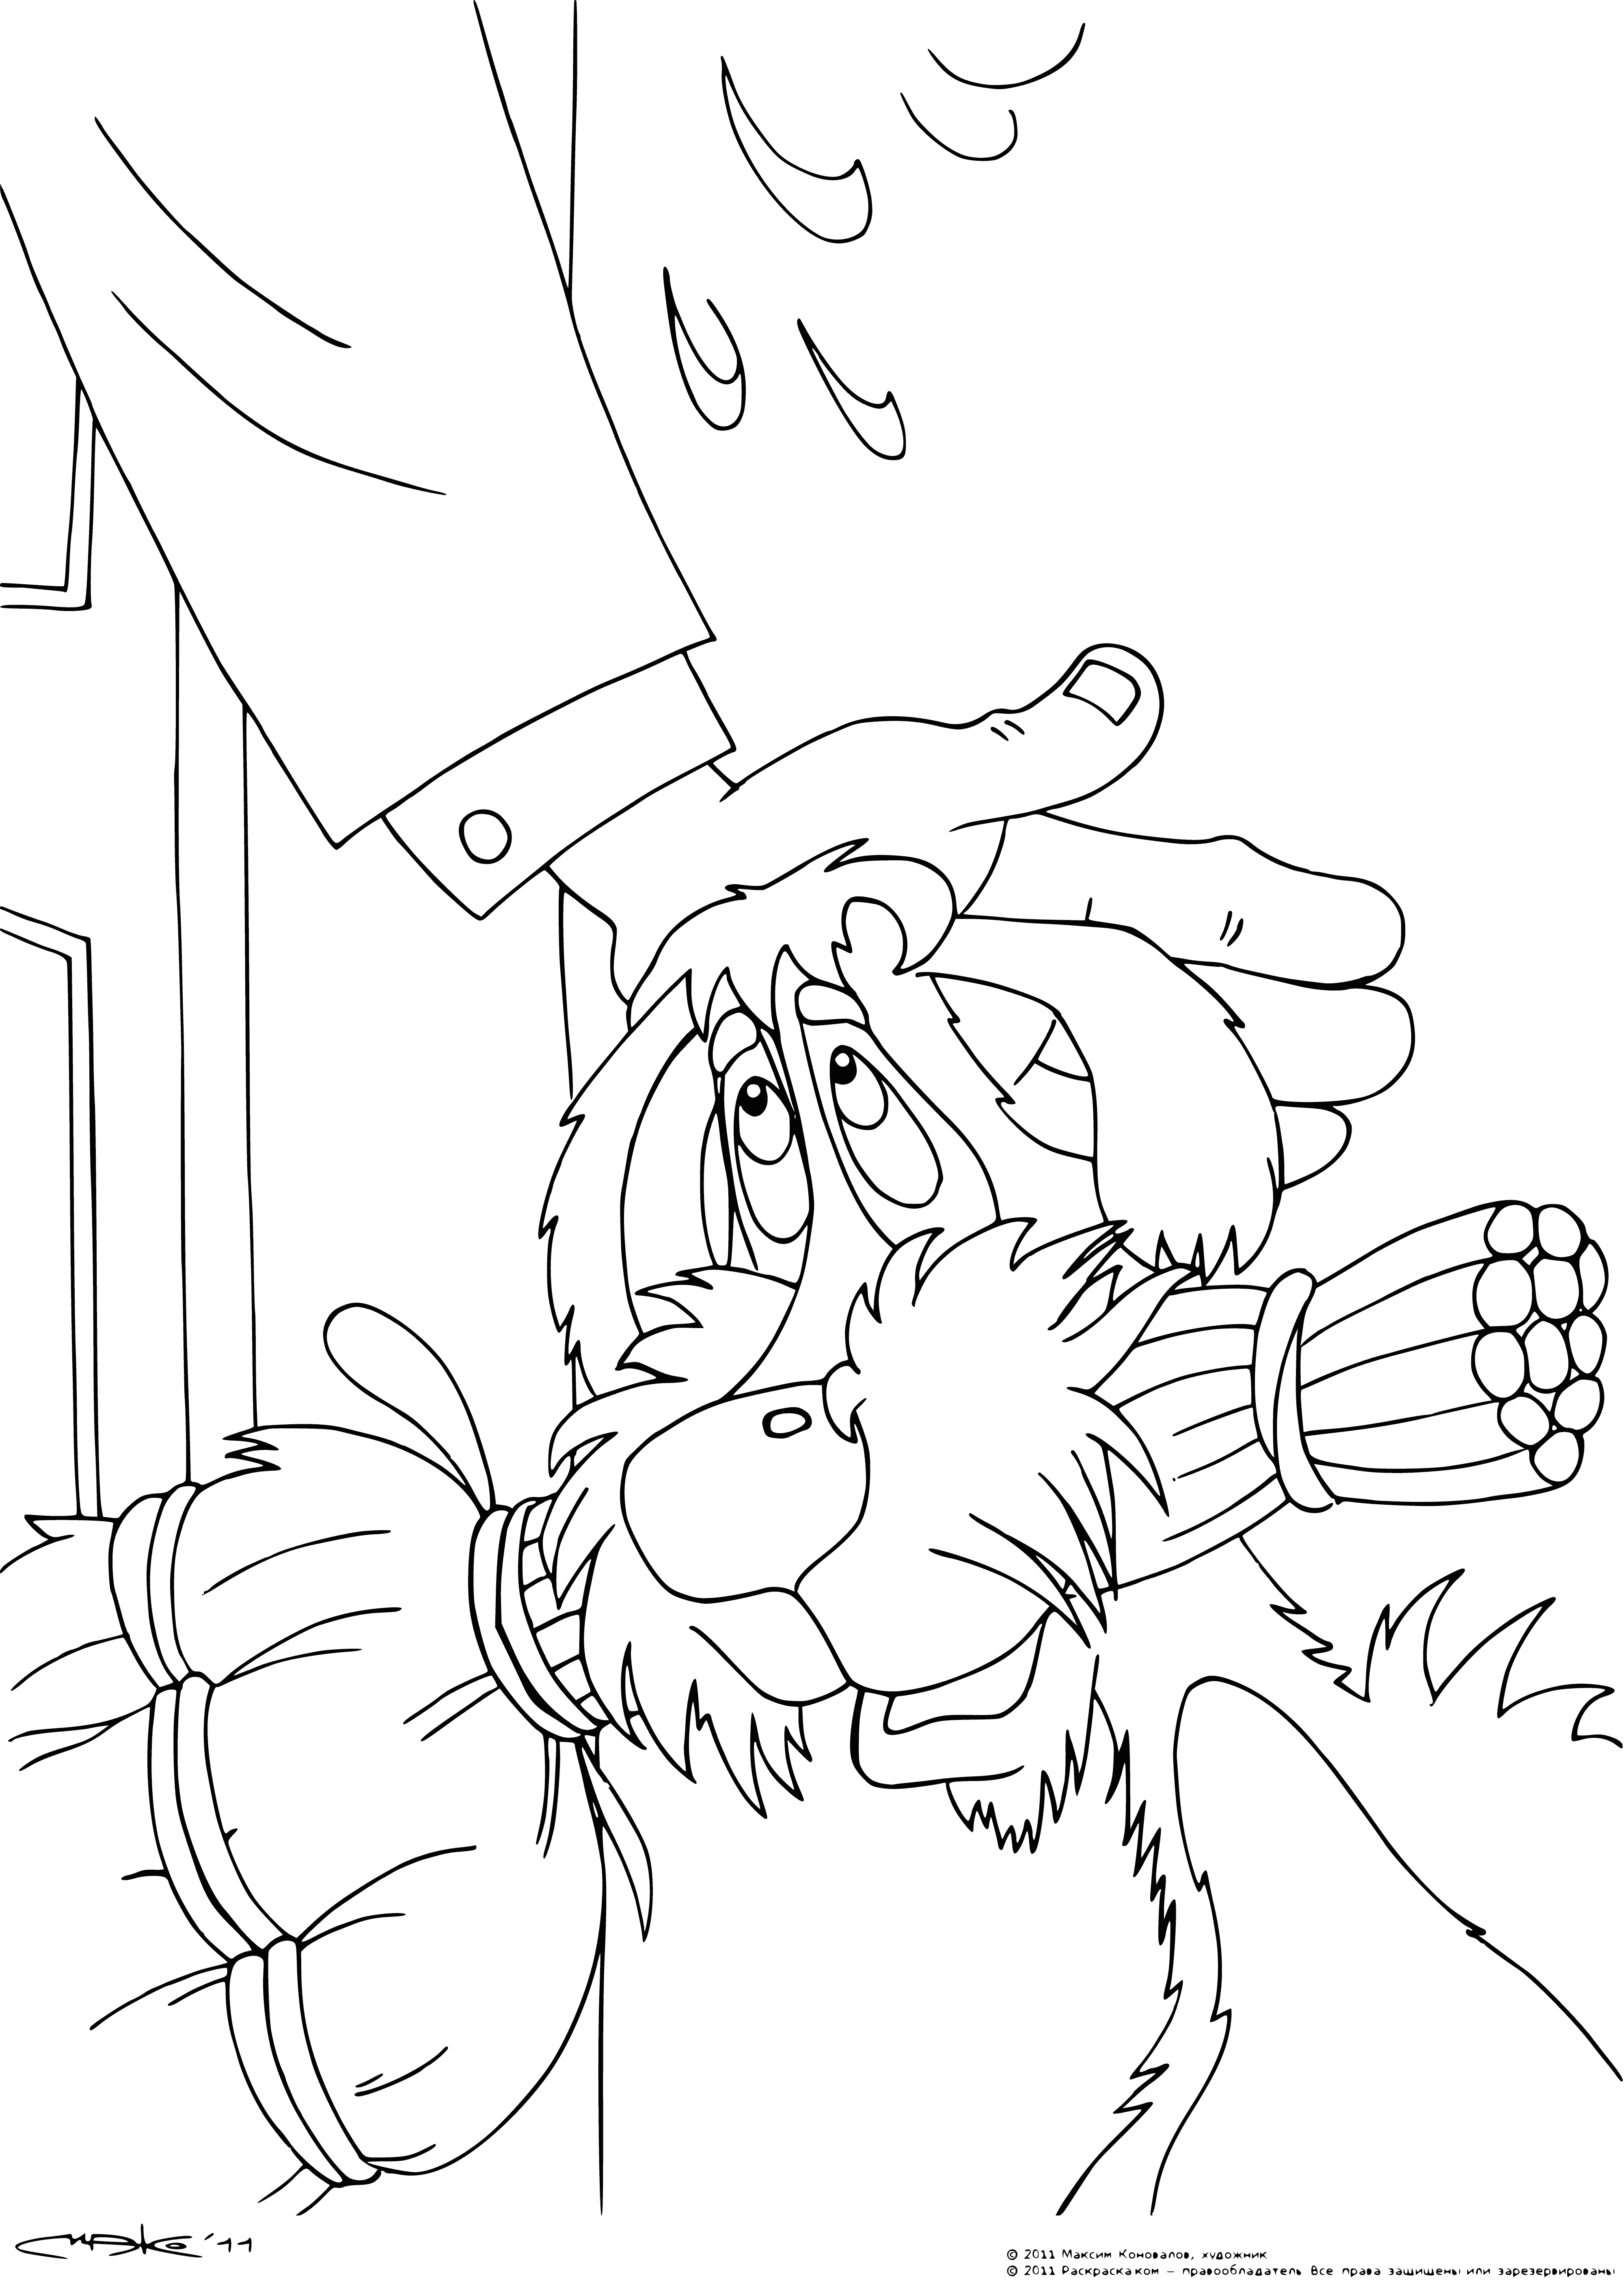 coloring page: Bobik visits Barbos as Grandfather watches. Barbos sits on the floor, looking up at Bobik.